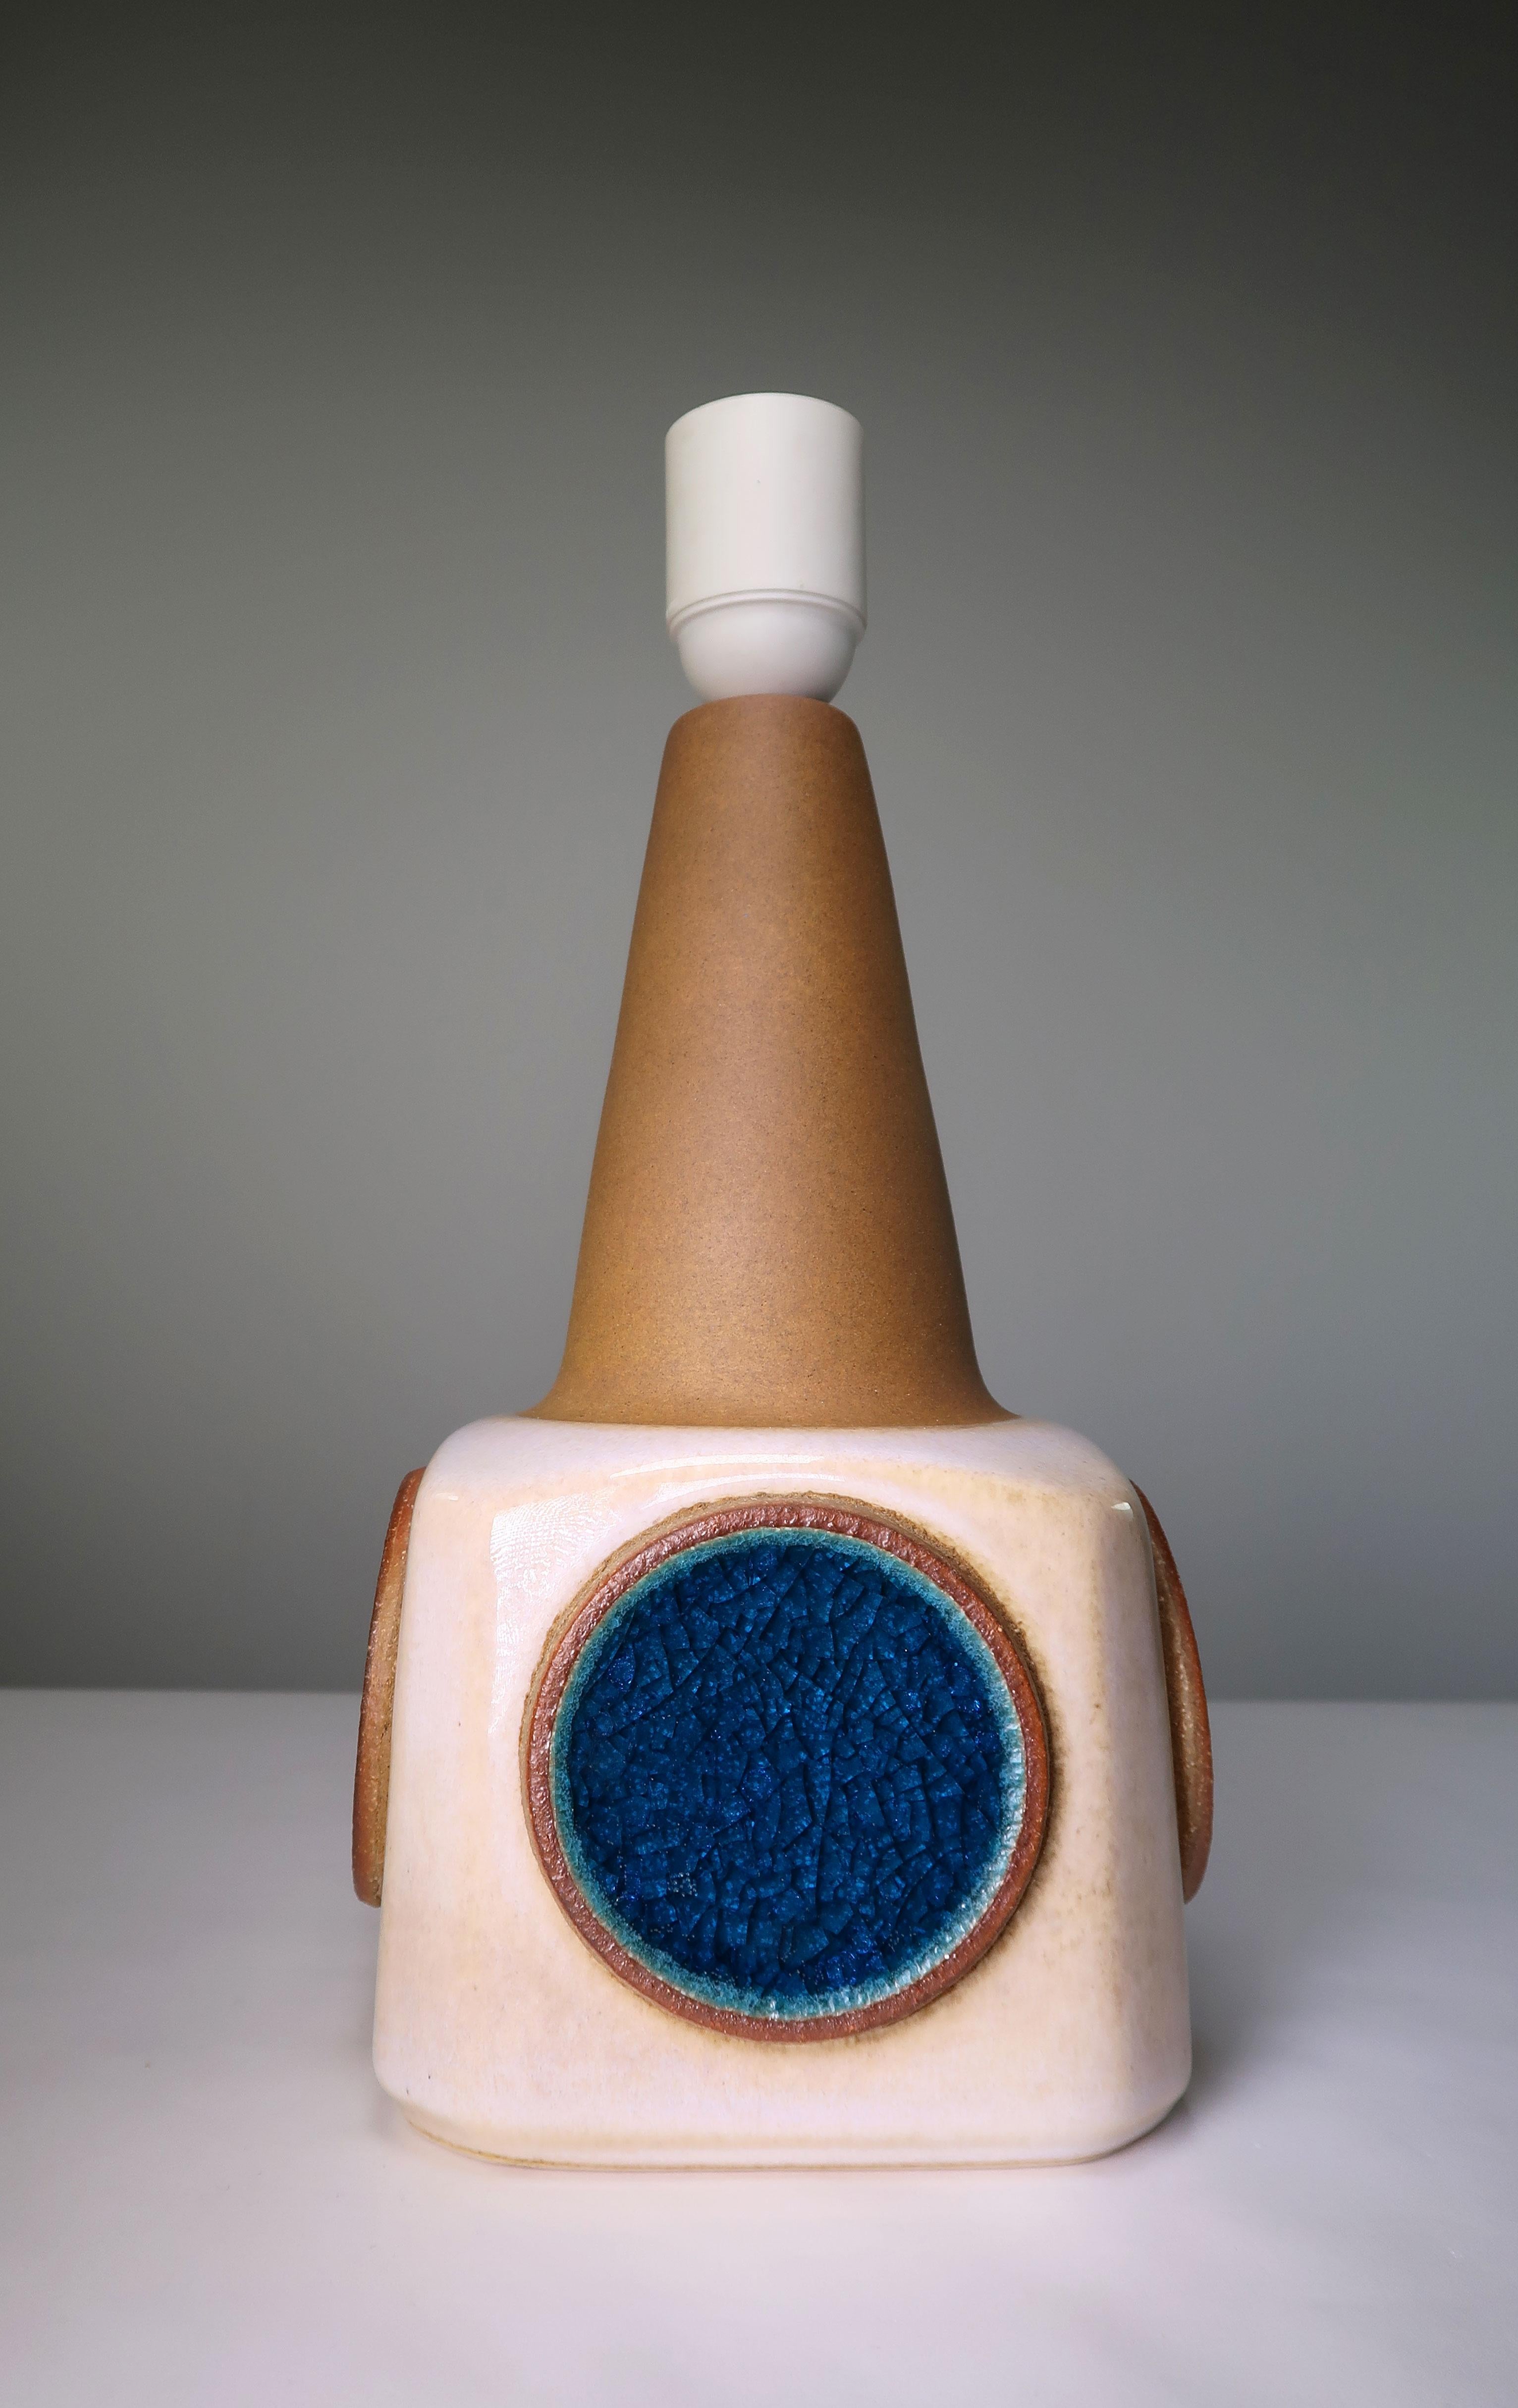 Danish Mid-Century Modern handmade ceramic table lamp by Søholm Stentøj. Raw neck, chalk and cream white colored belly with four bright blue crackle glaze circles on each side of the lamp. Manufactured in the 1960s on the small Danish island of